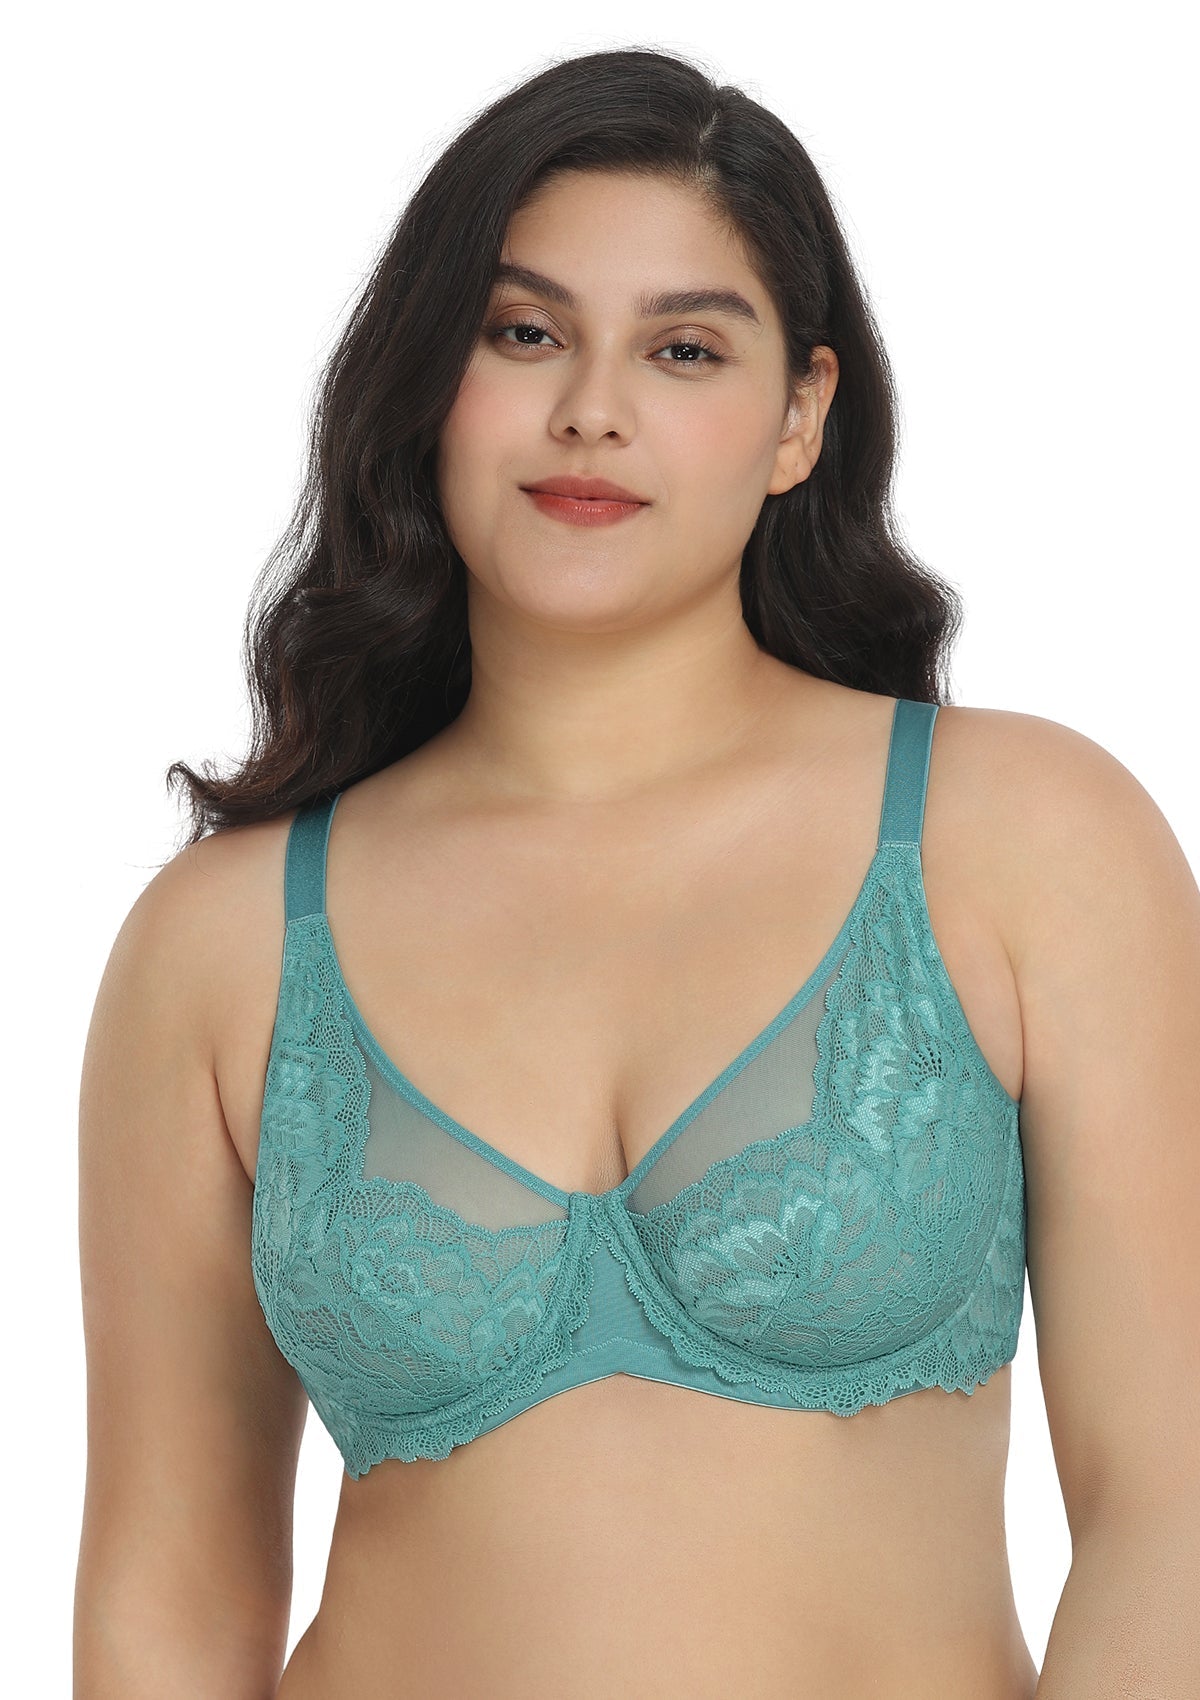 HSIA Paeonia Lace Full Coverage Underwire Non-Padded Uplifting Bra - Light Coral / 40 / C